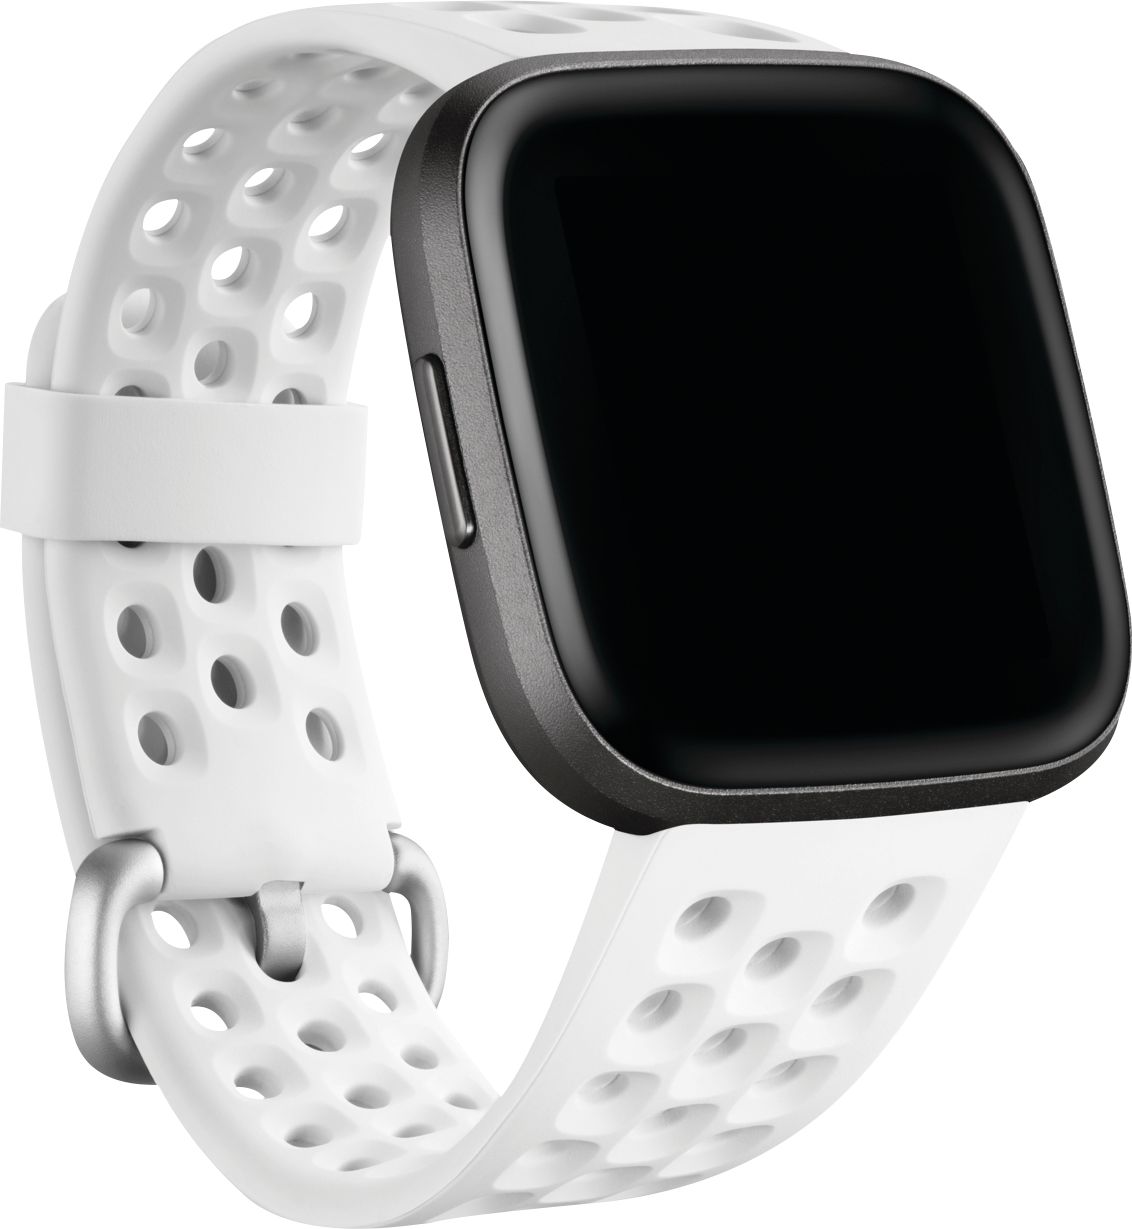 Angle View: Sport Silicone Large Watch Band for Fitbit Versa 2 and Versa Lite - Frost White